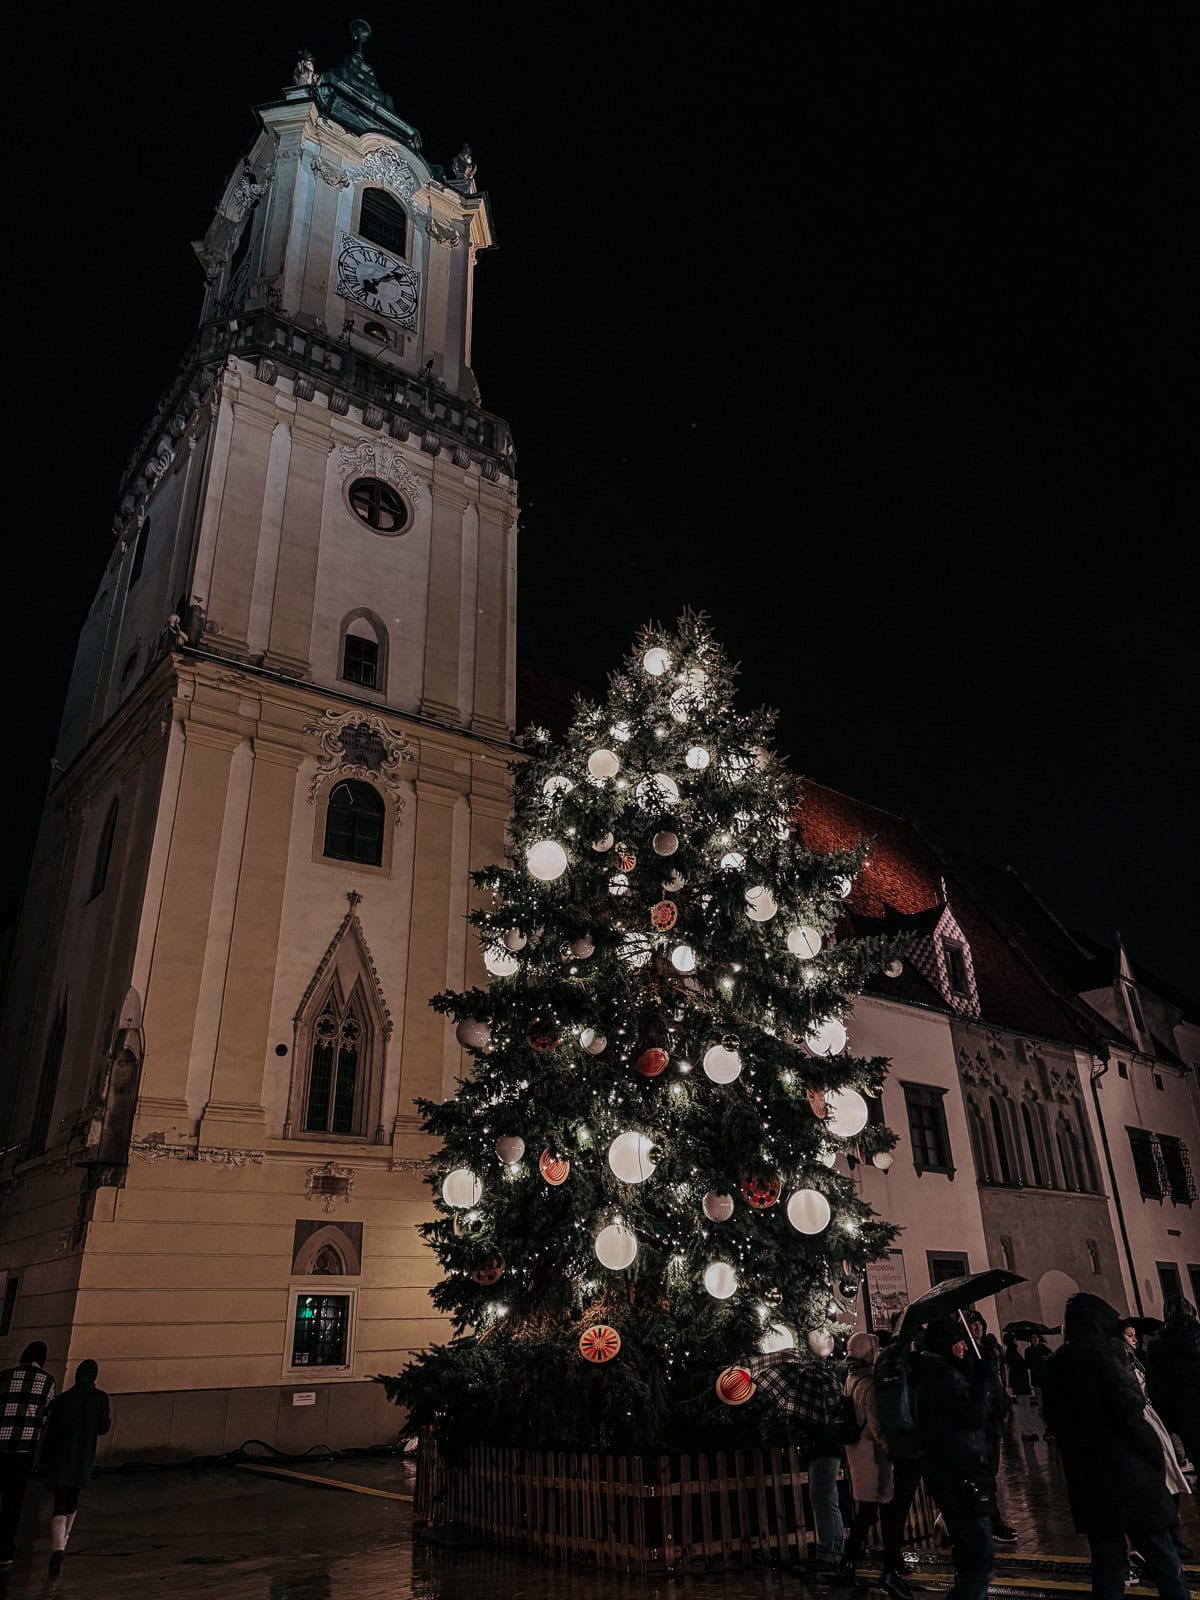 A majestic Christmas tree illuminated with white lights, standing before a tall, ornate church tower in a lively night setting, with people milling around the square.